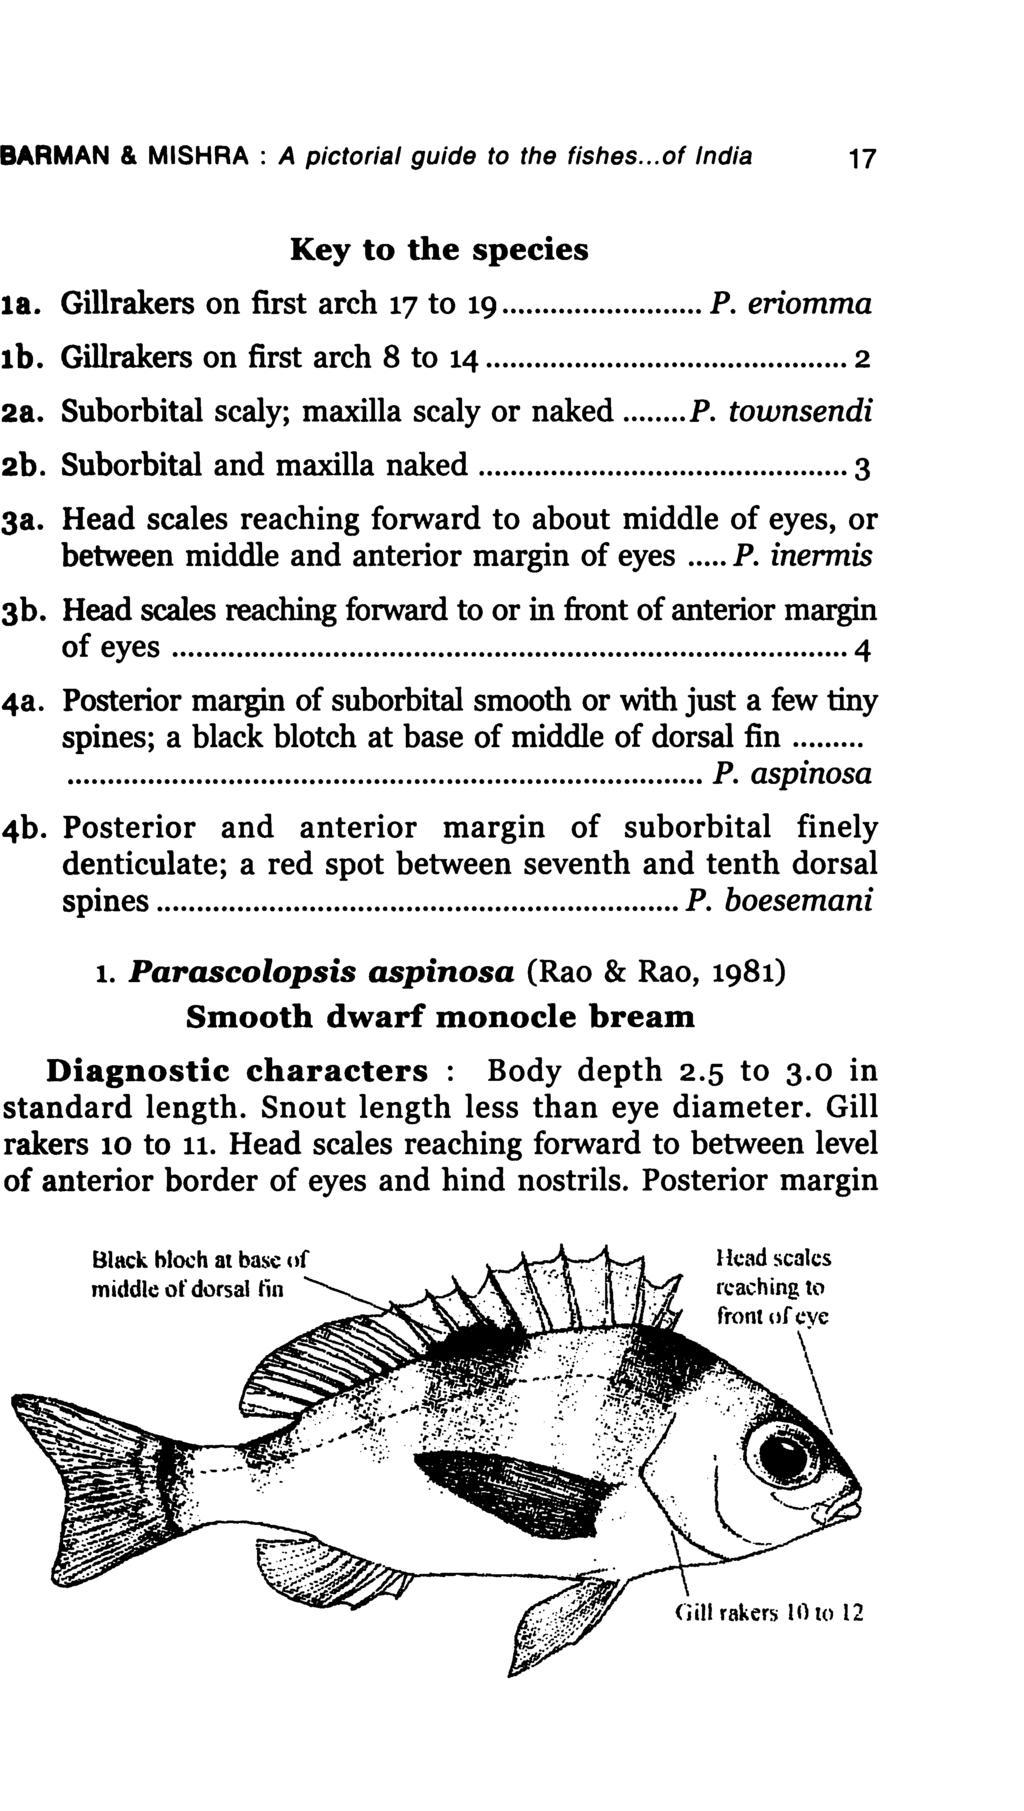 BARMAN & MISHRA : A pictorial guide to the fishes... of India 17 Key to the species 18. Gillrakers on first arch 17 to 19... P. eriomma 1 b. Gillrakers on first arch 8 to 14... 2 2&.